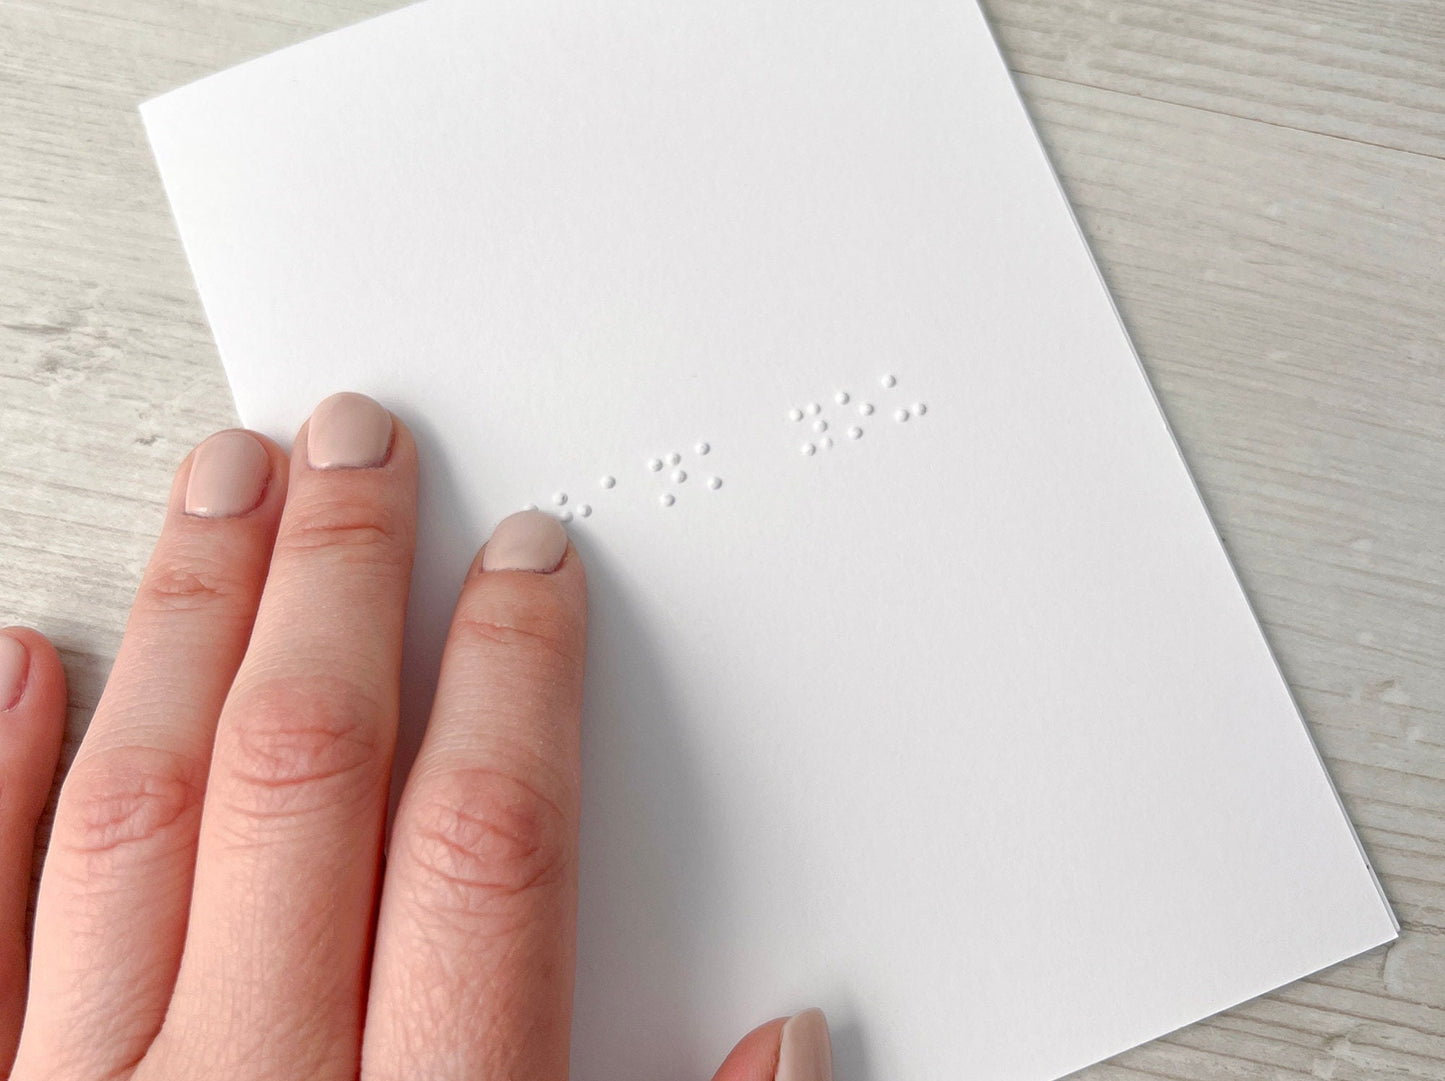 Braille Get Well Soon Greetings Card - Pastel Blue Tactile Card for Blind and Visually Impaired People